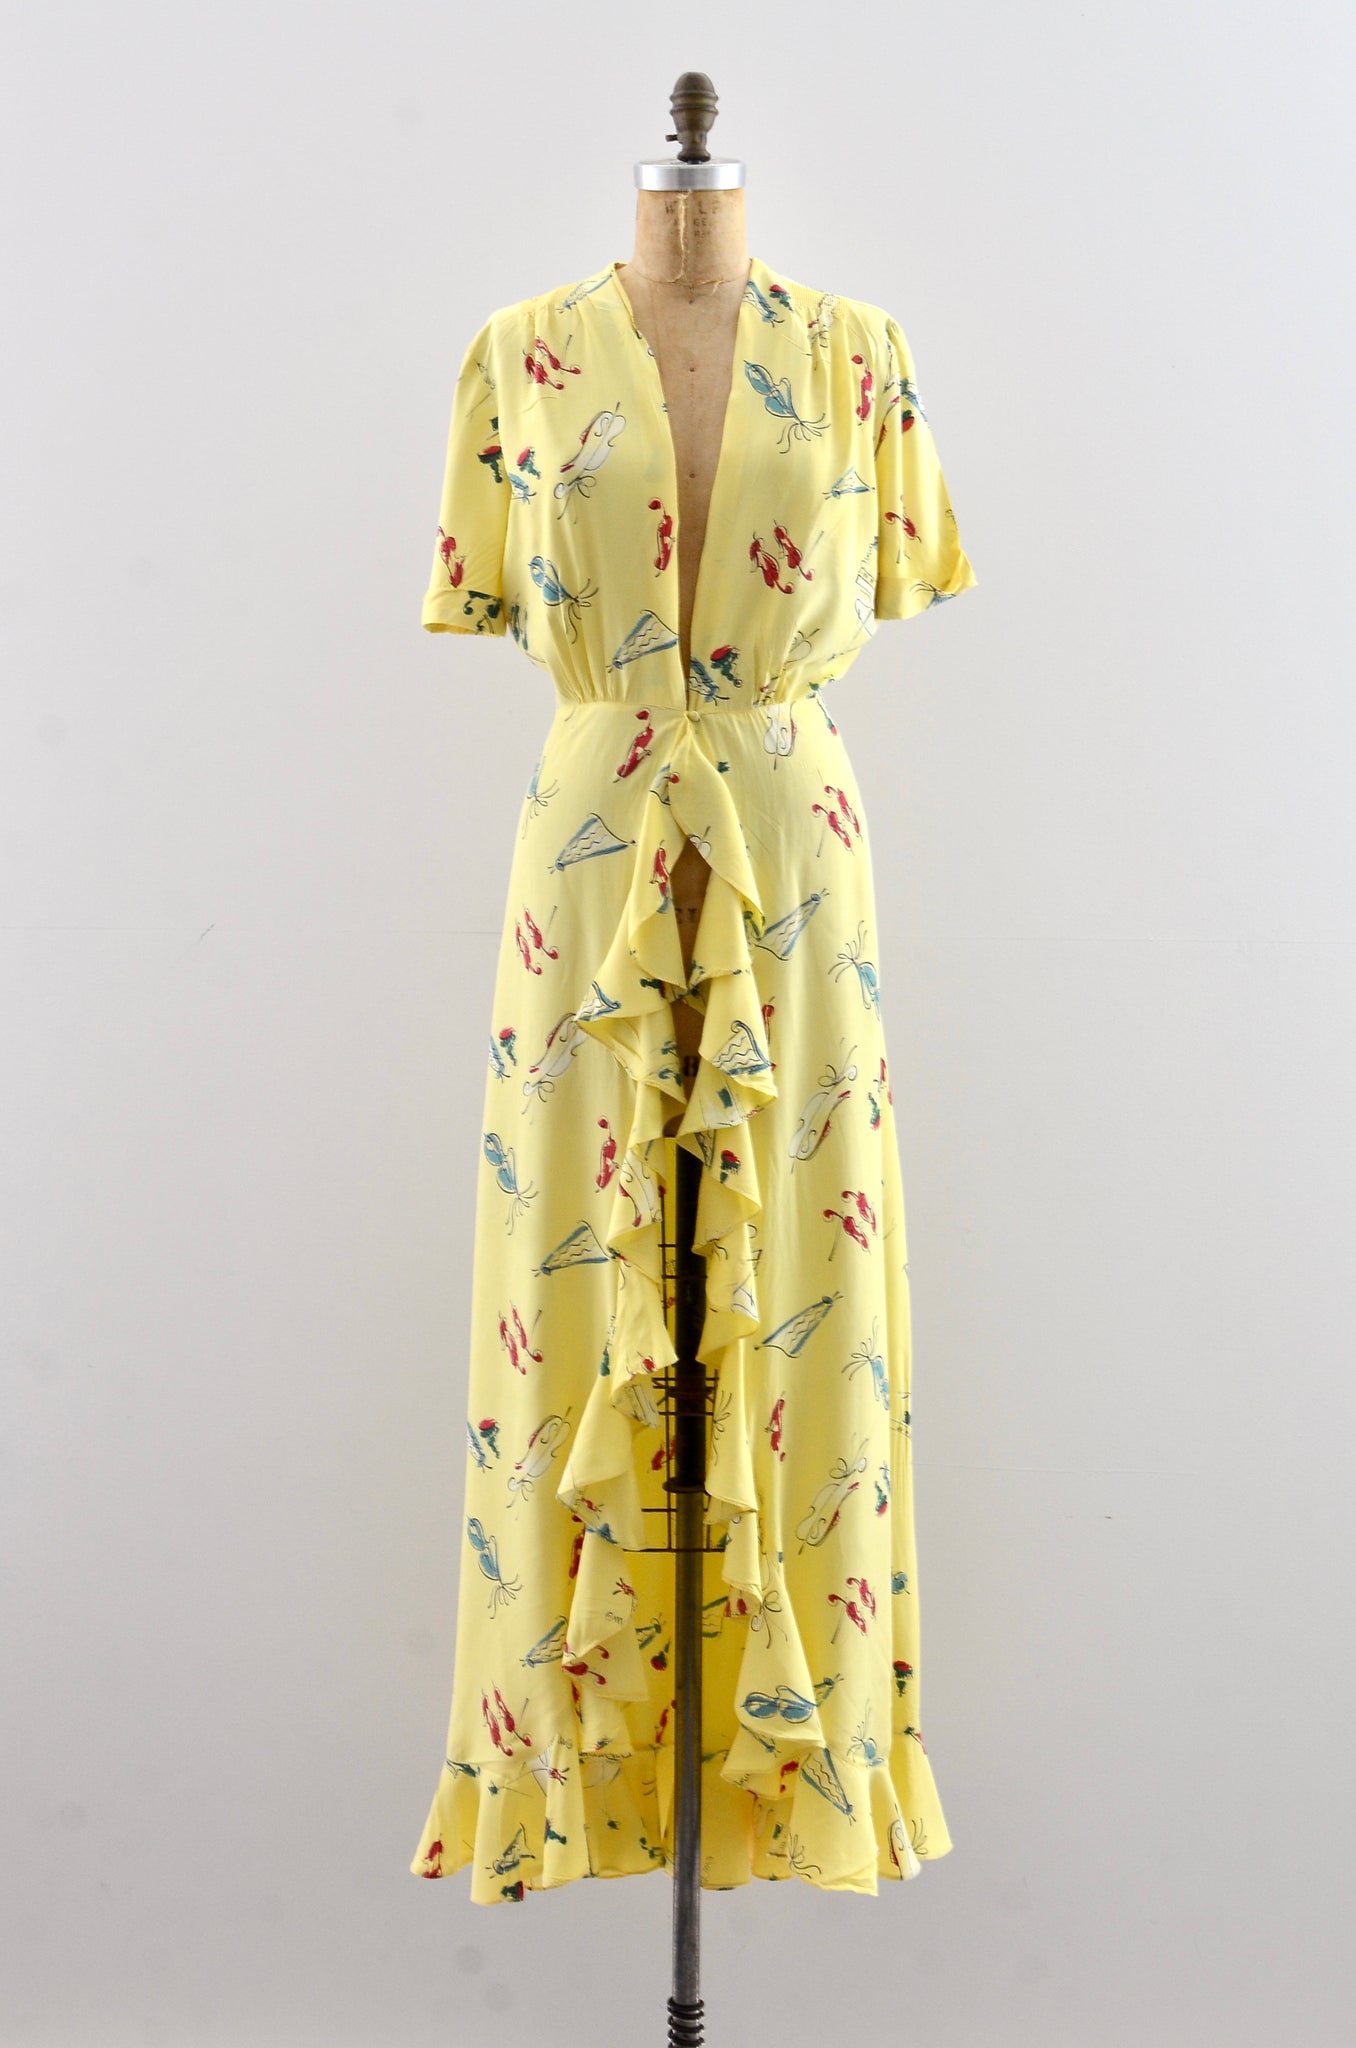 1950's Novelty Print Dressing Gown